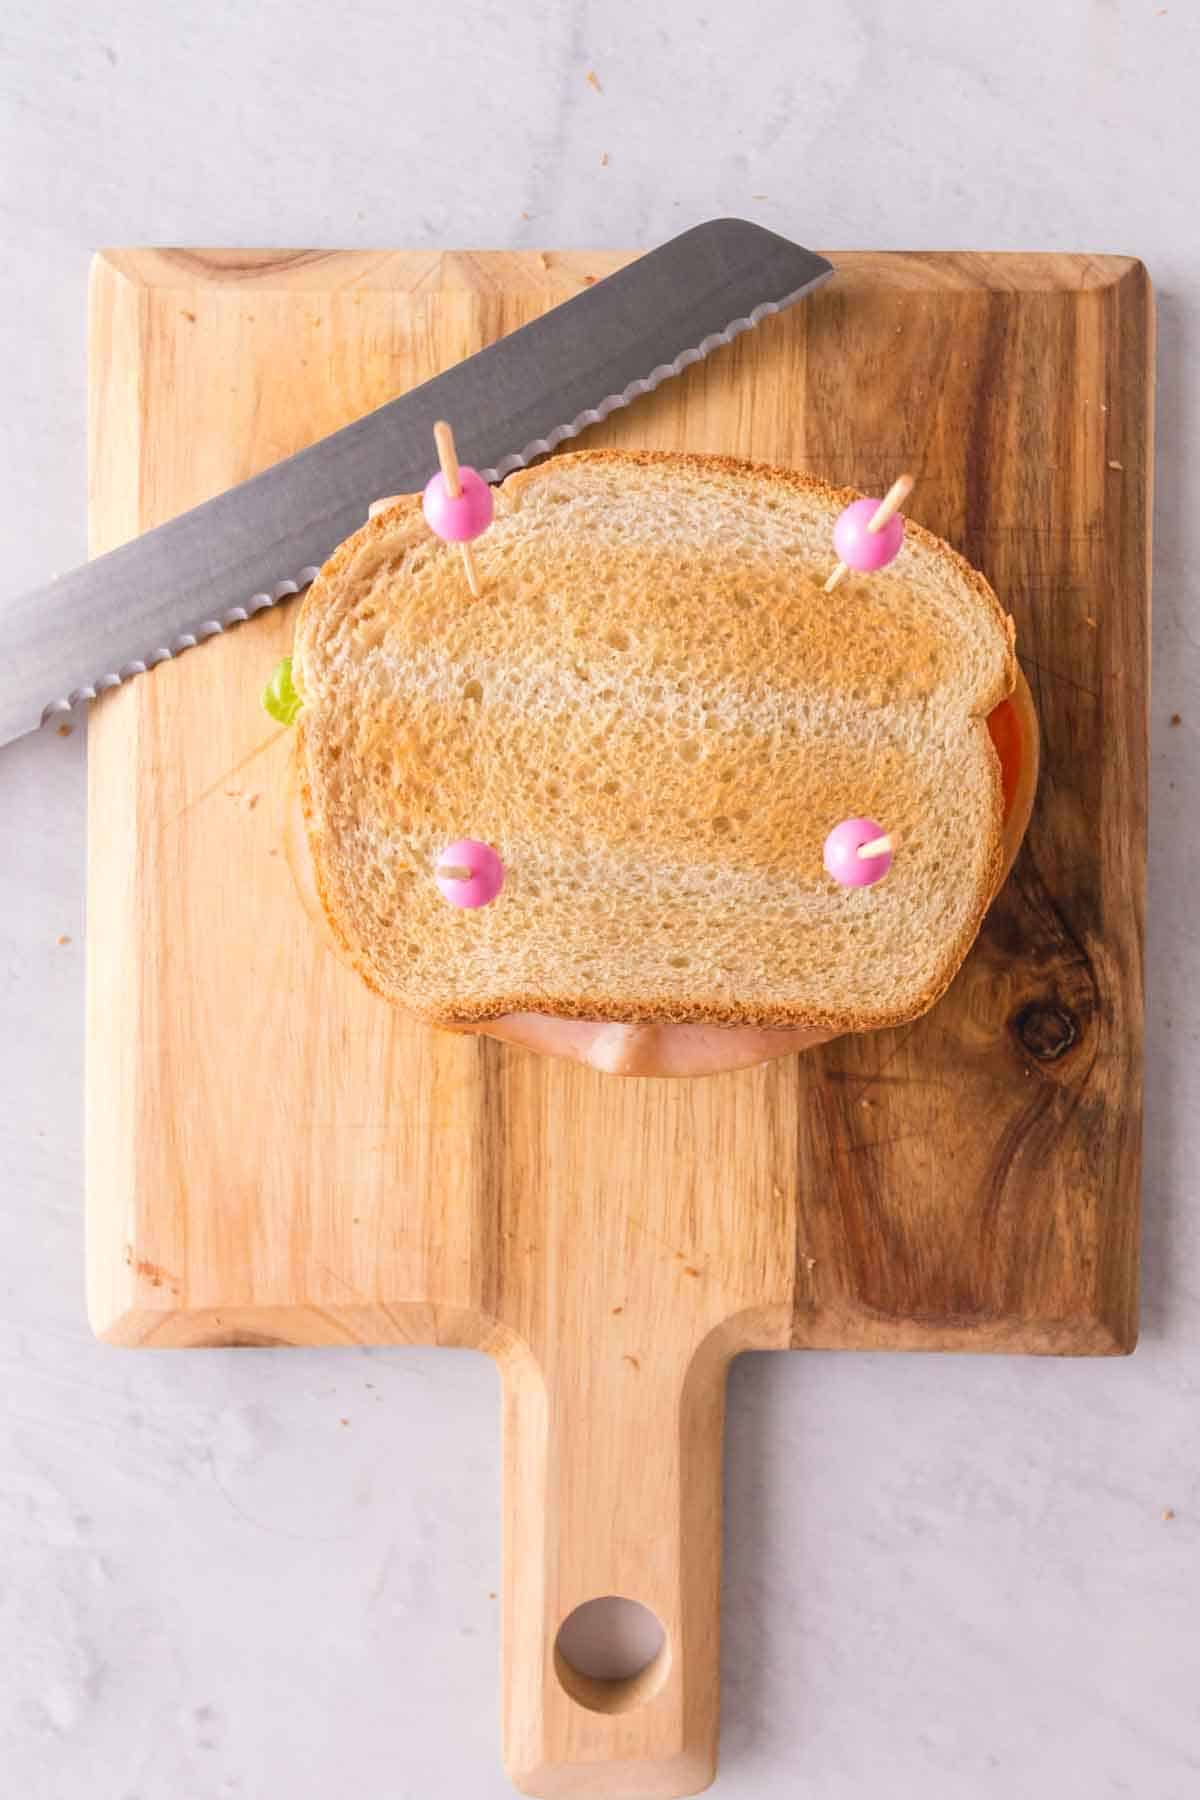 Toothpicks holding the whole sandwich together. 